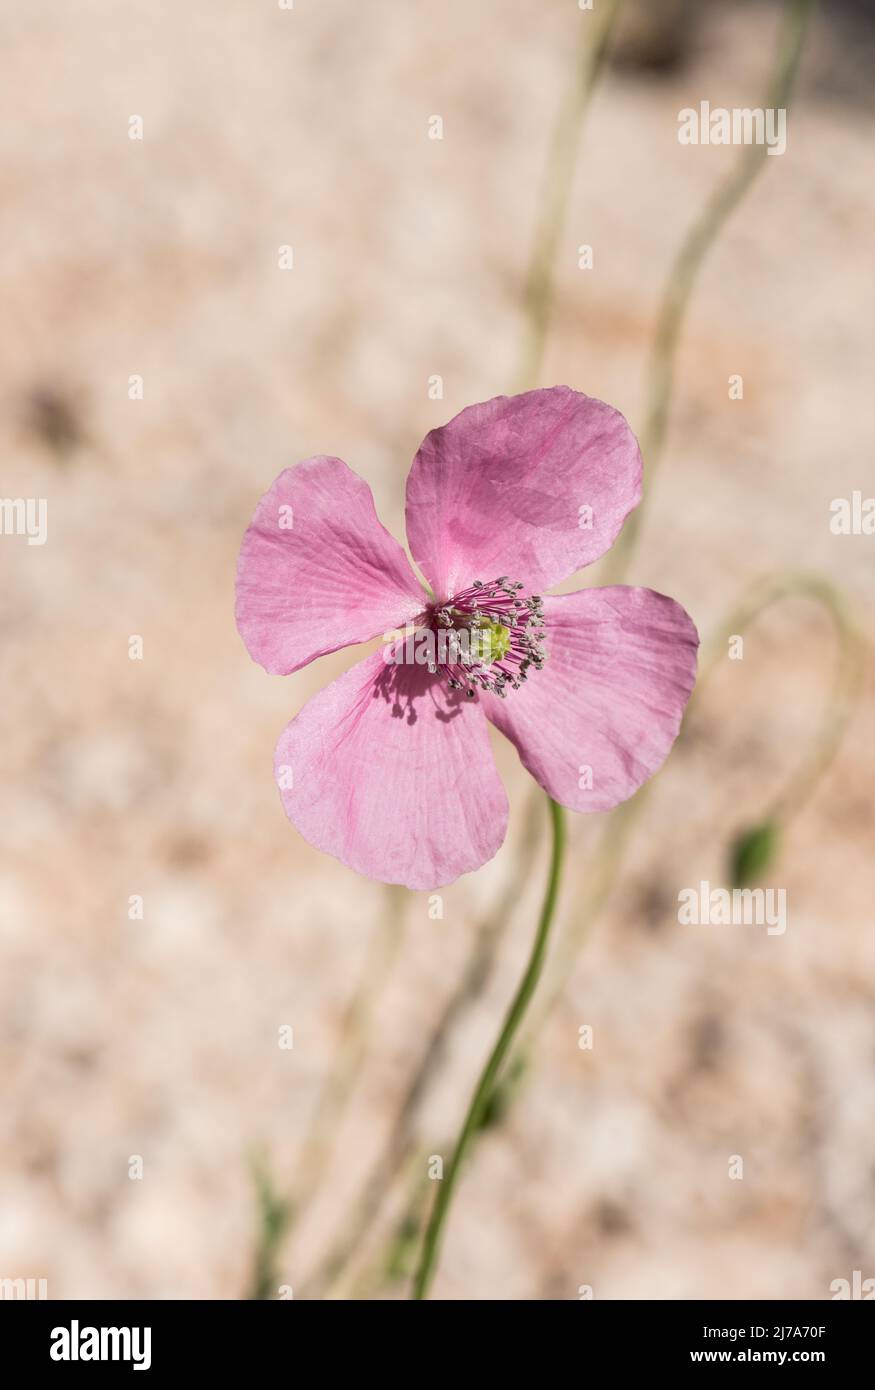 Pink flower of the poppy, Papaver gracile Stock Photo